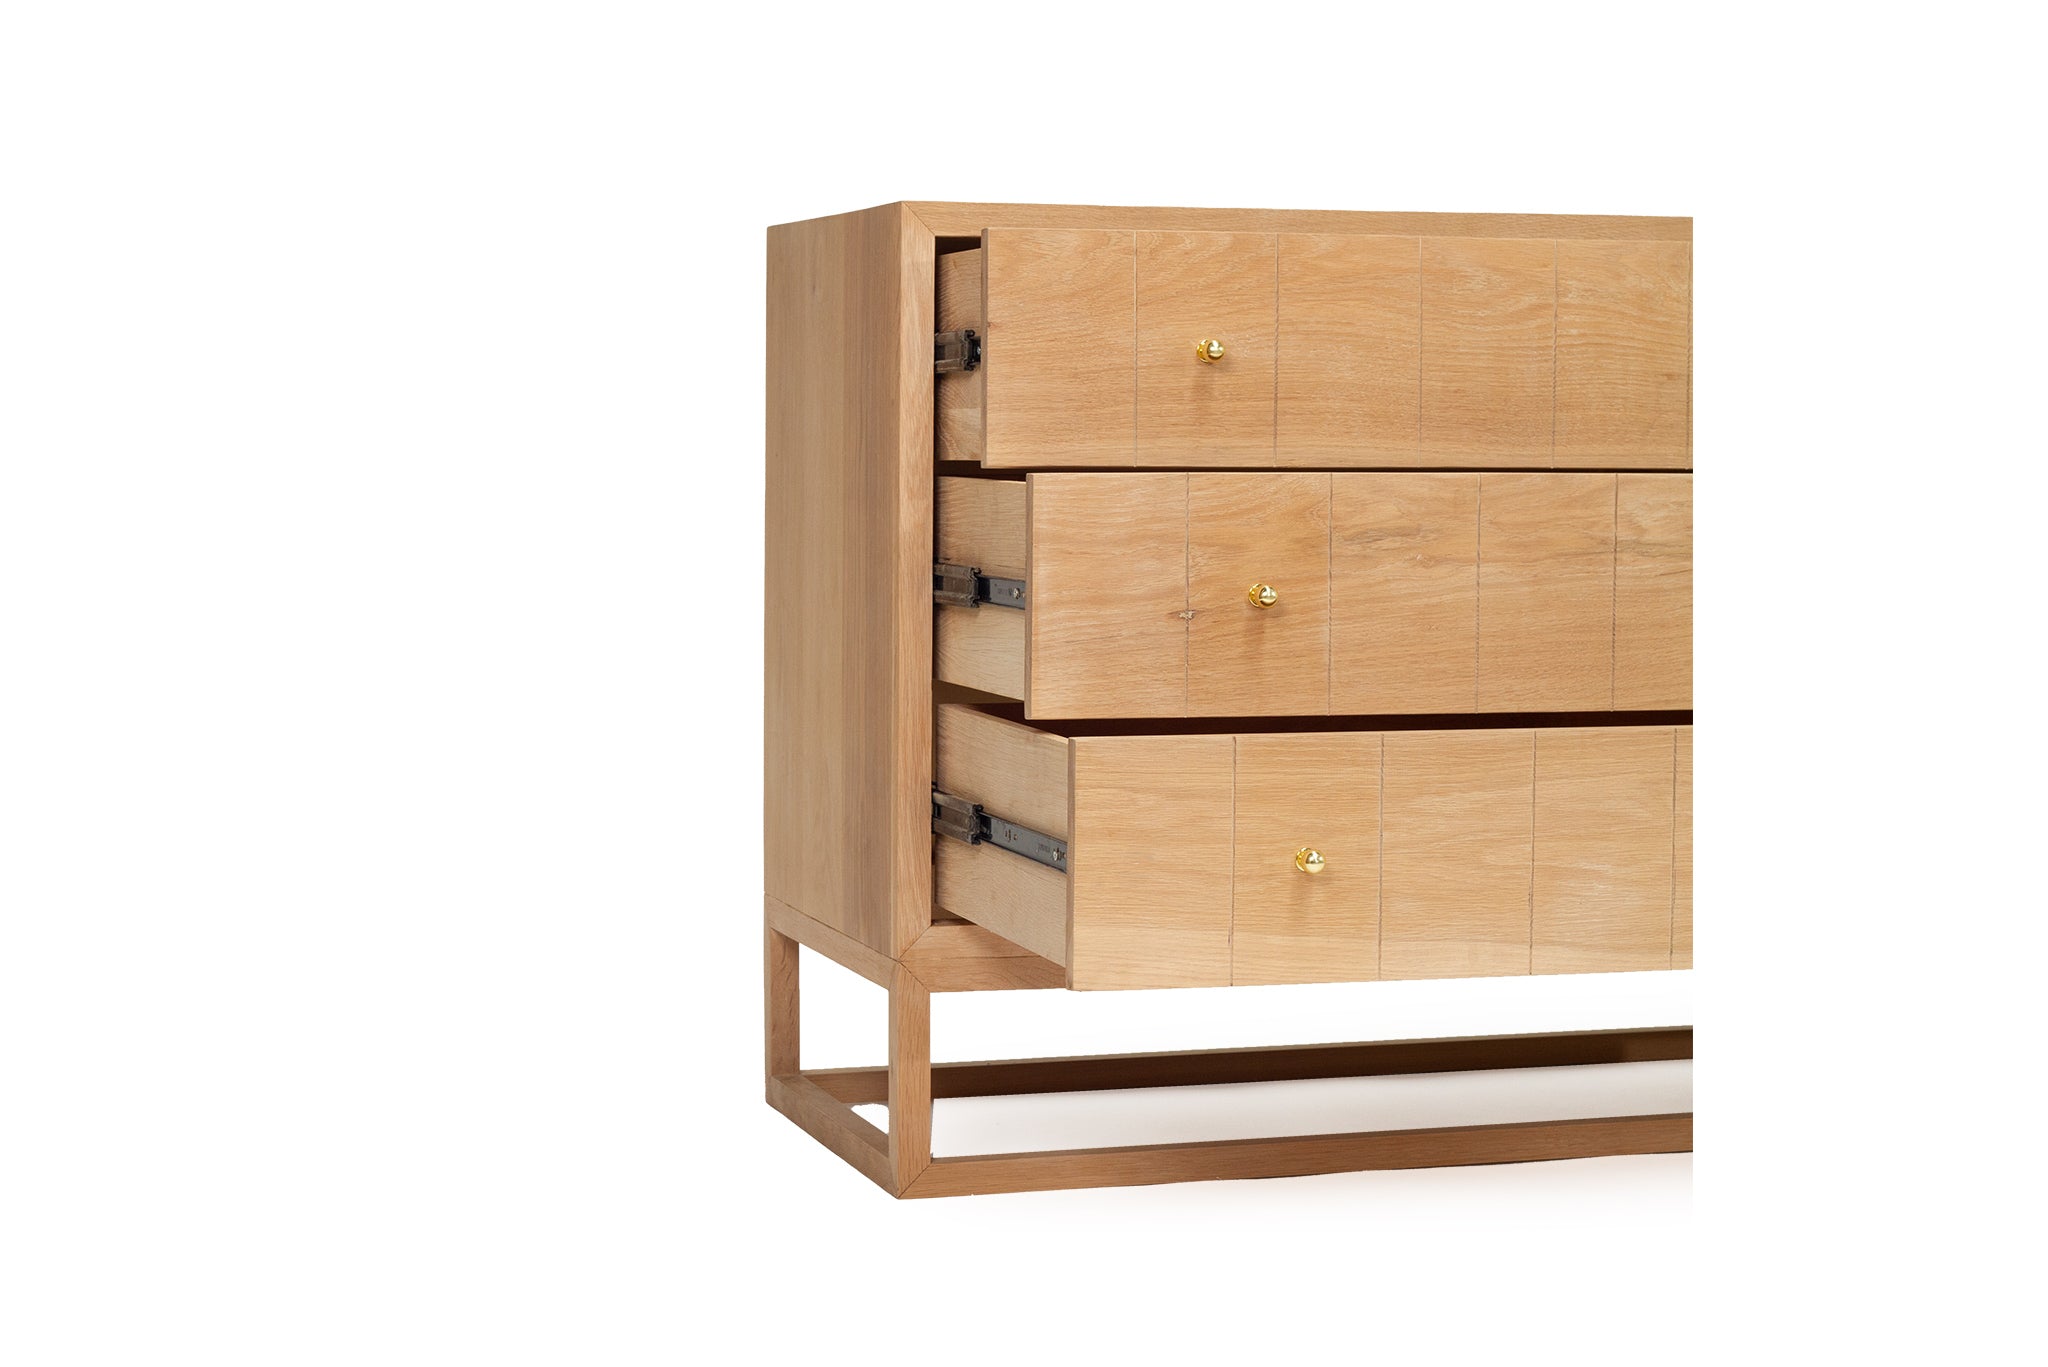 Coogee American Oak Chest Of Drawers – 185cm